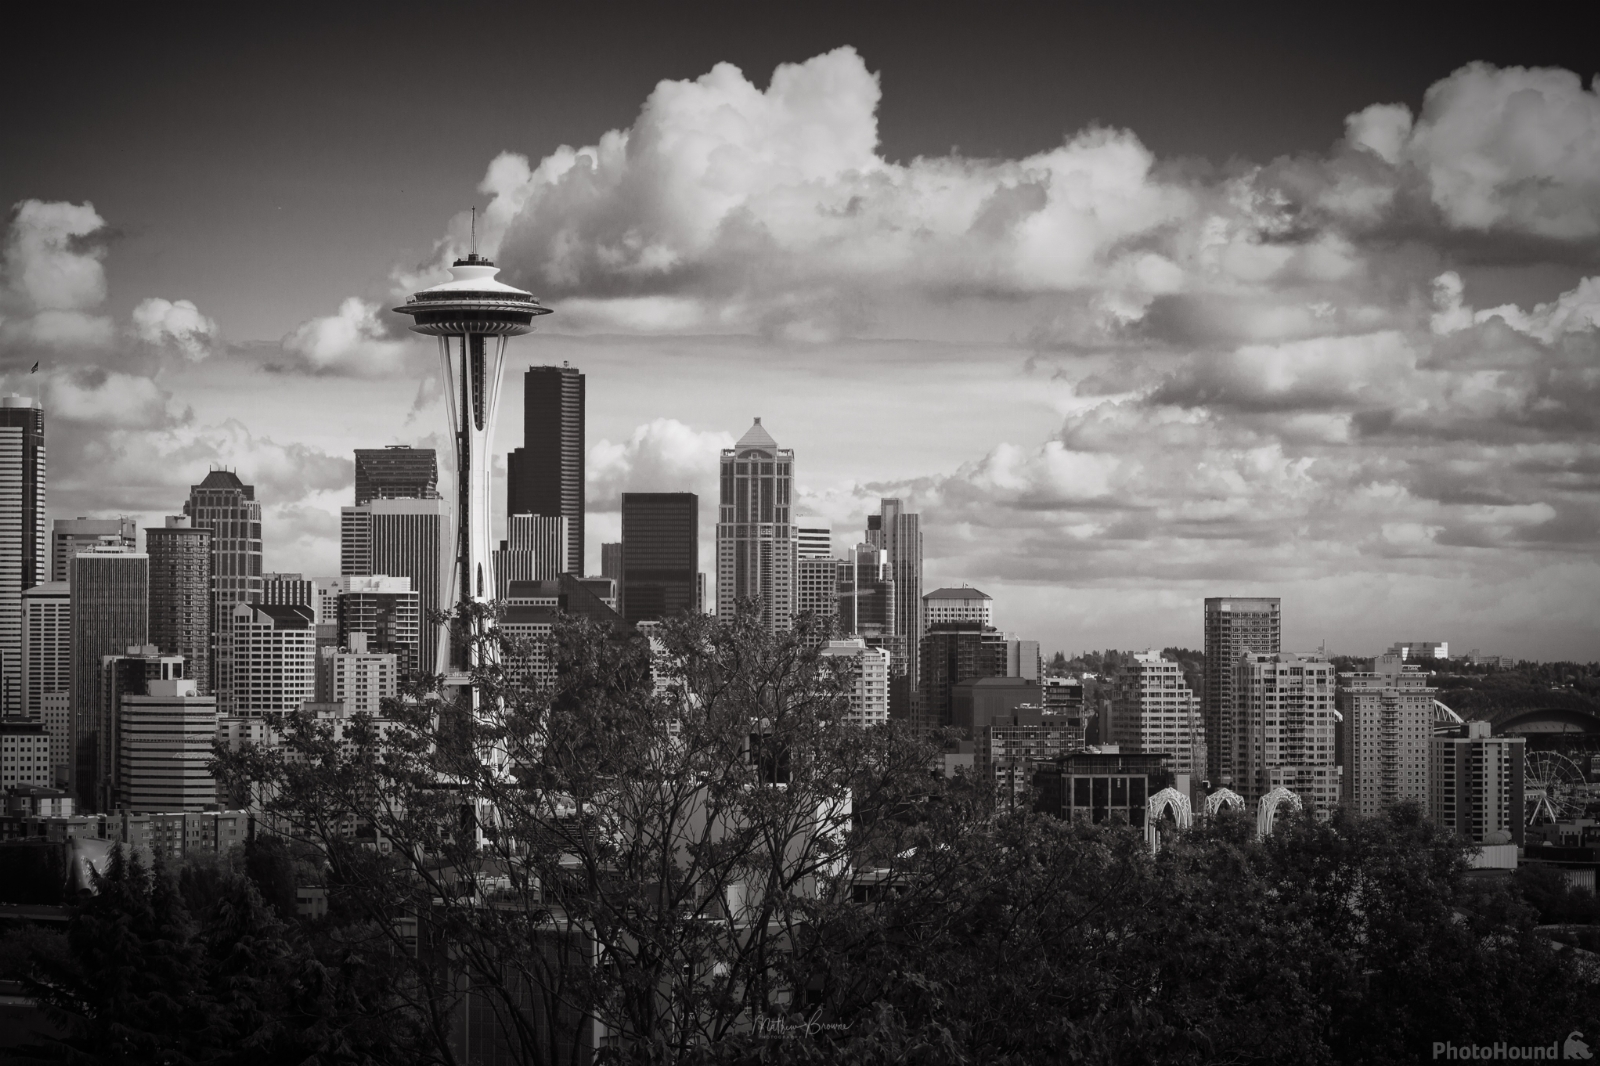 Image of Kerry Park by Mathew Browne